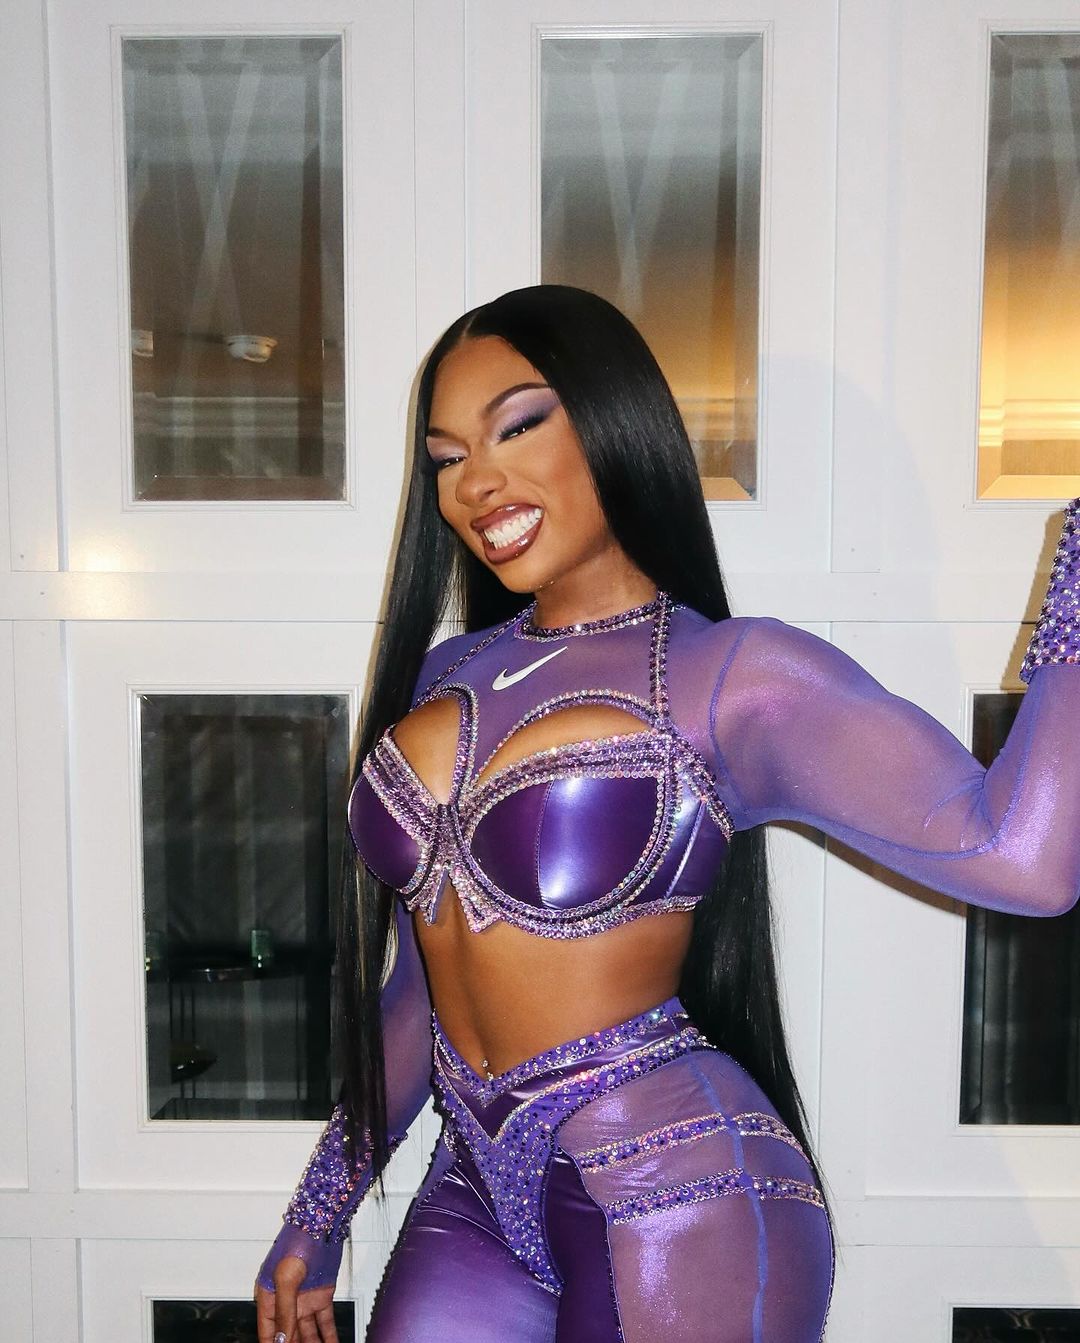 Introducing the new Megan Thee Stallion x Nike activewear line